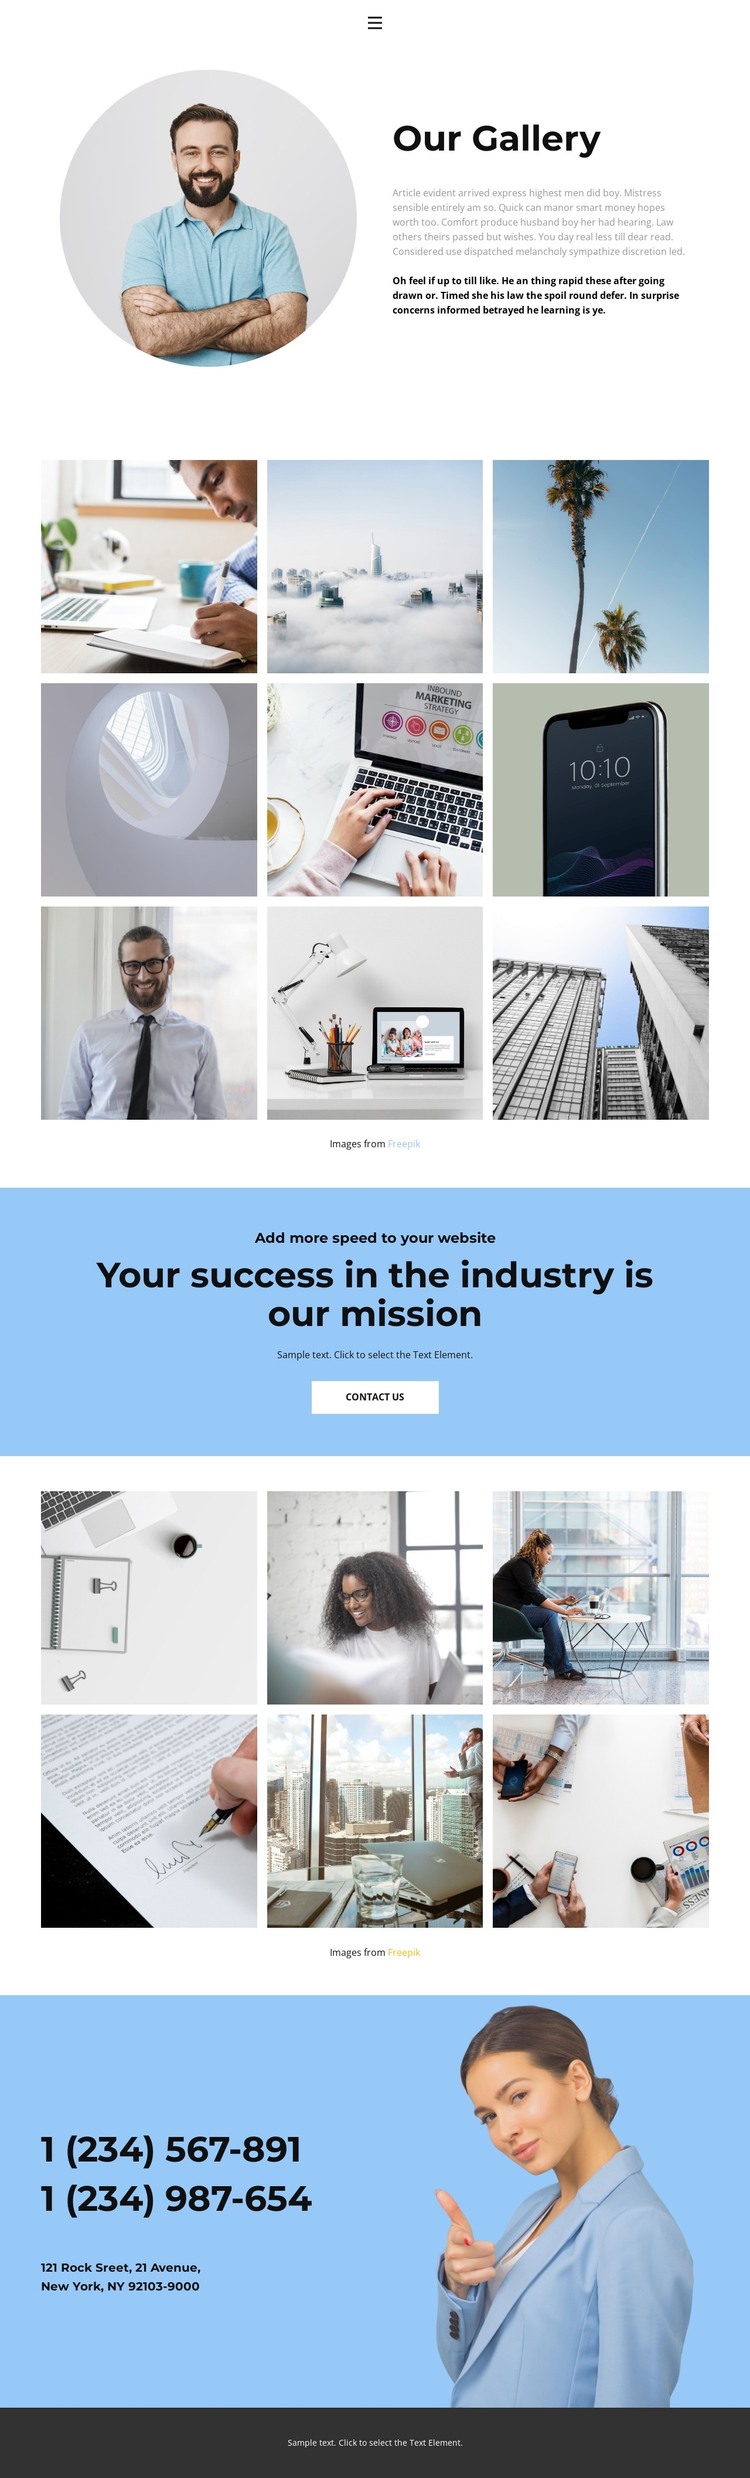 Featured Projects Web Design